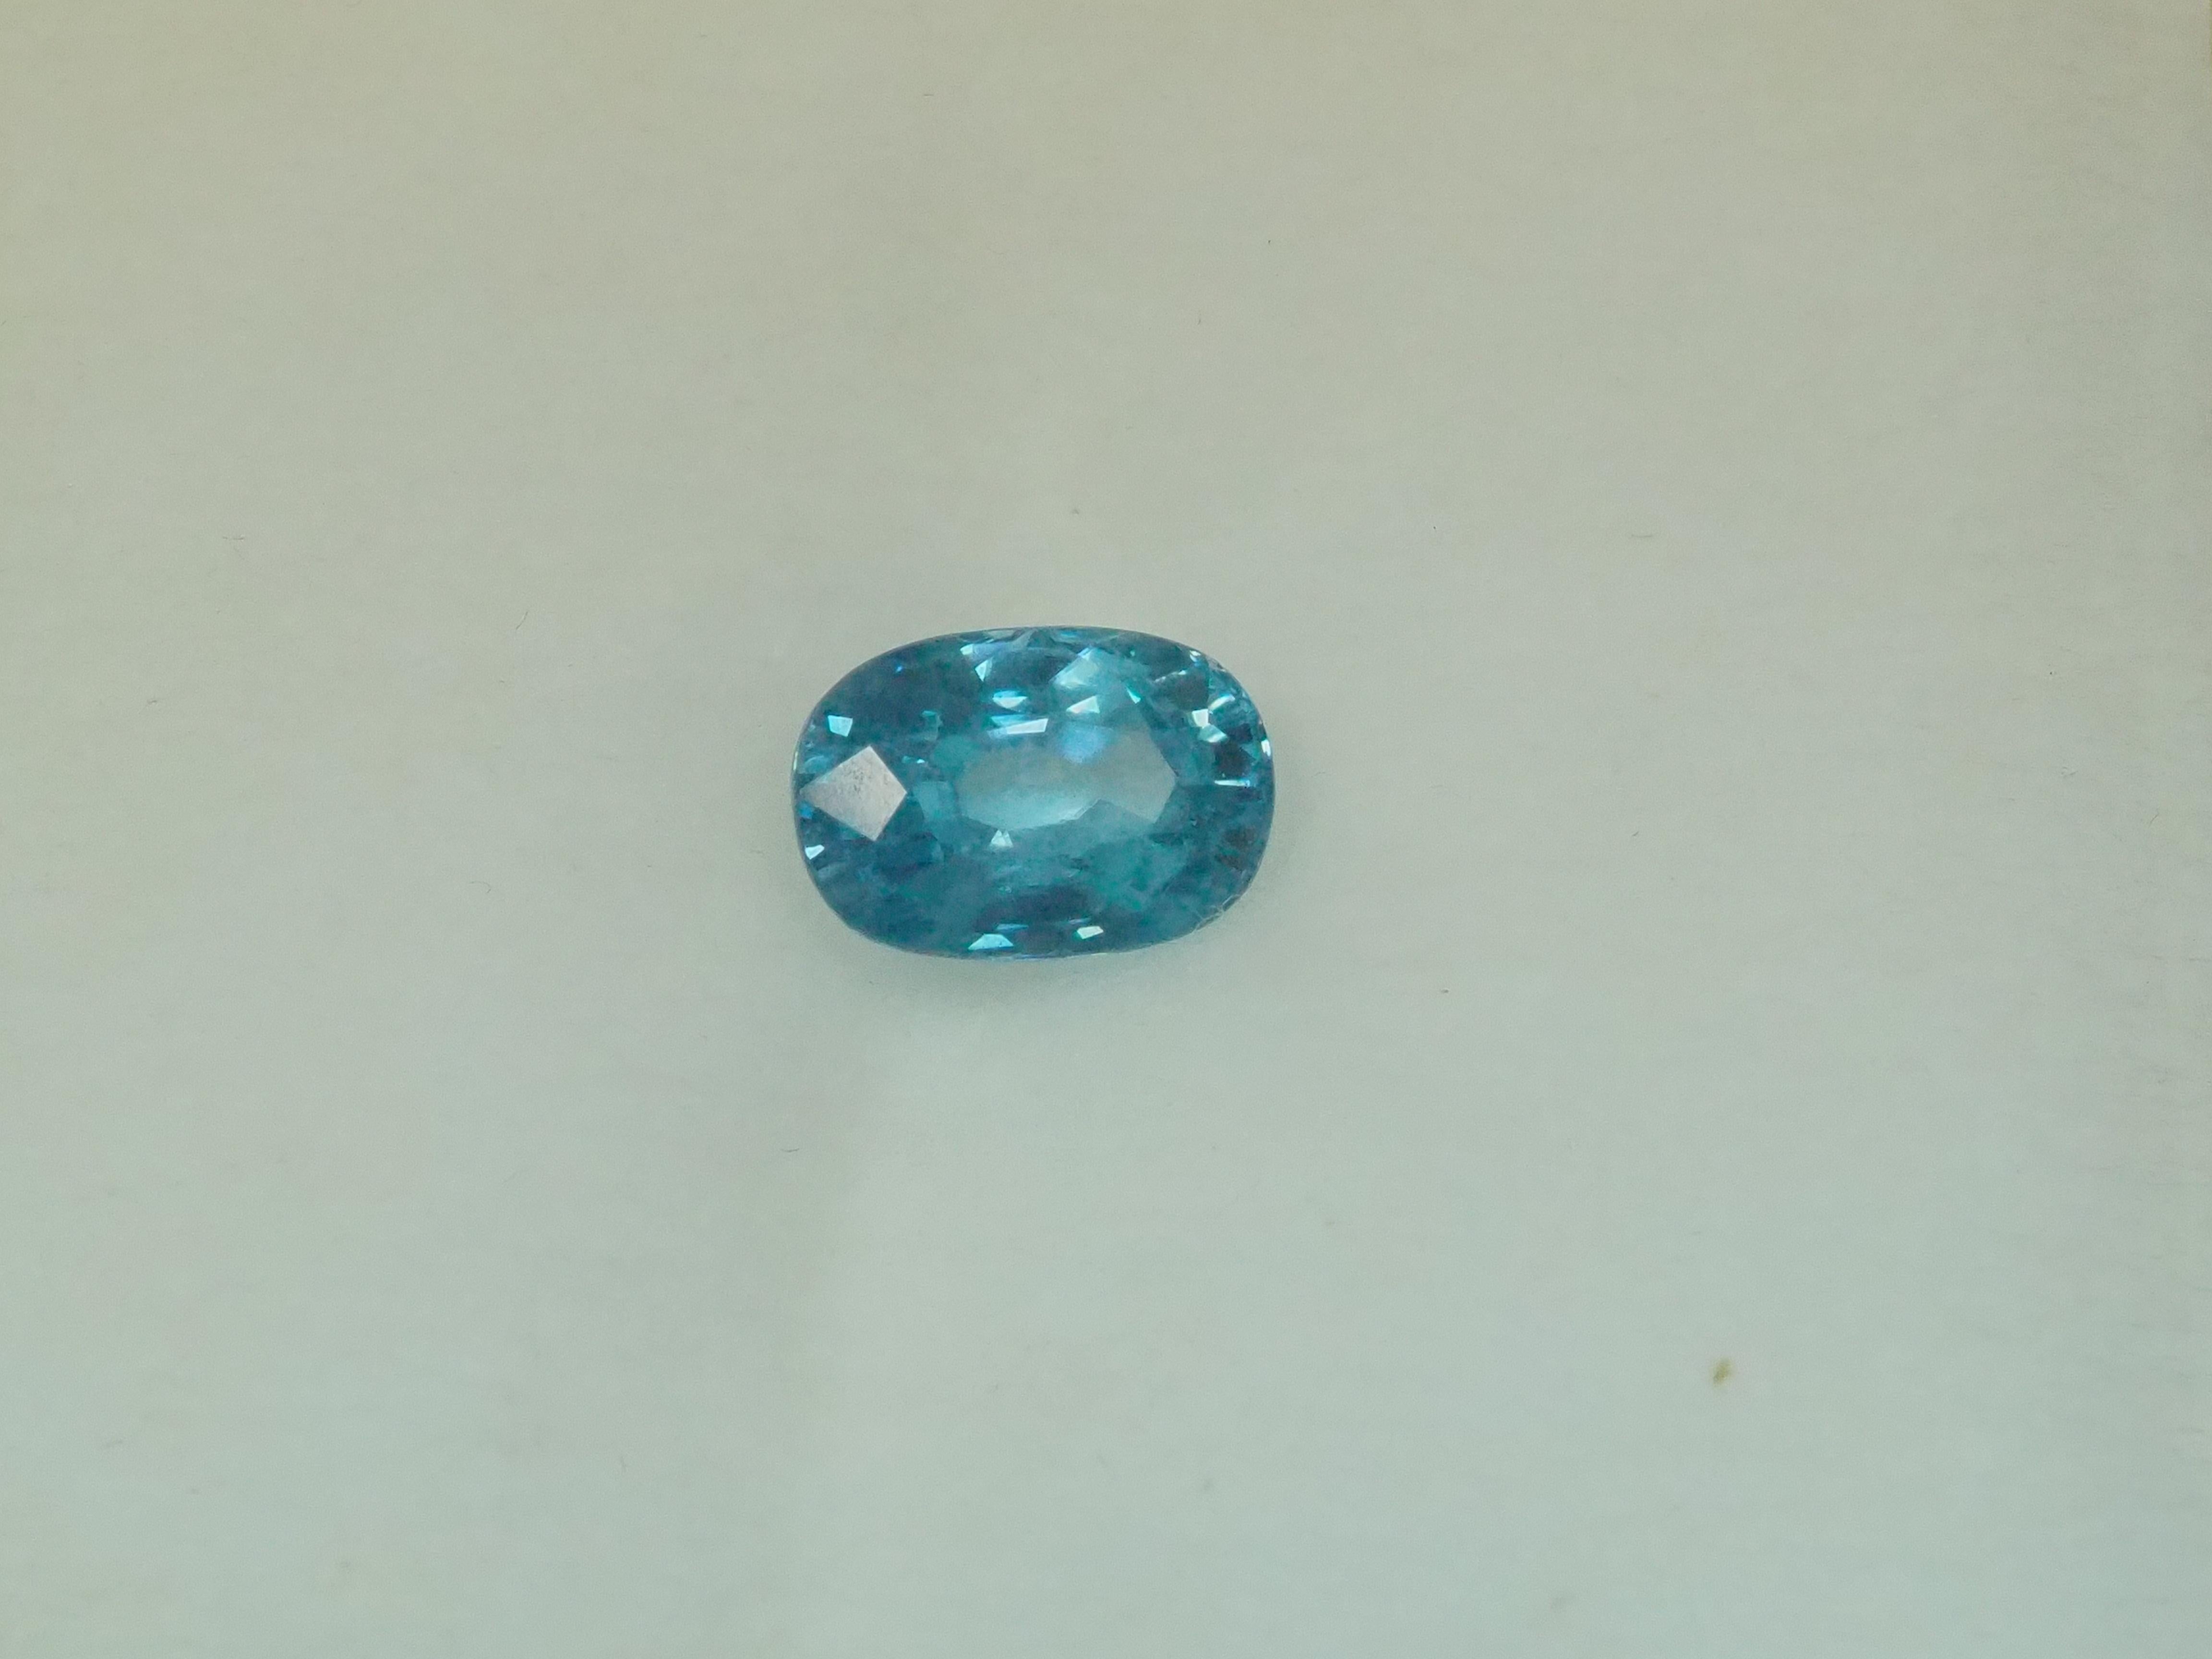 AIGS Certified 4.80ct Oval Blue Zircon, 10.27x7.09x5.89 mm For Sale 5